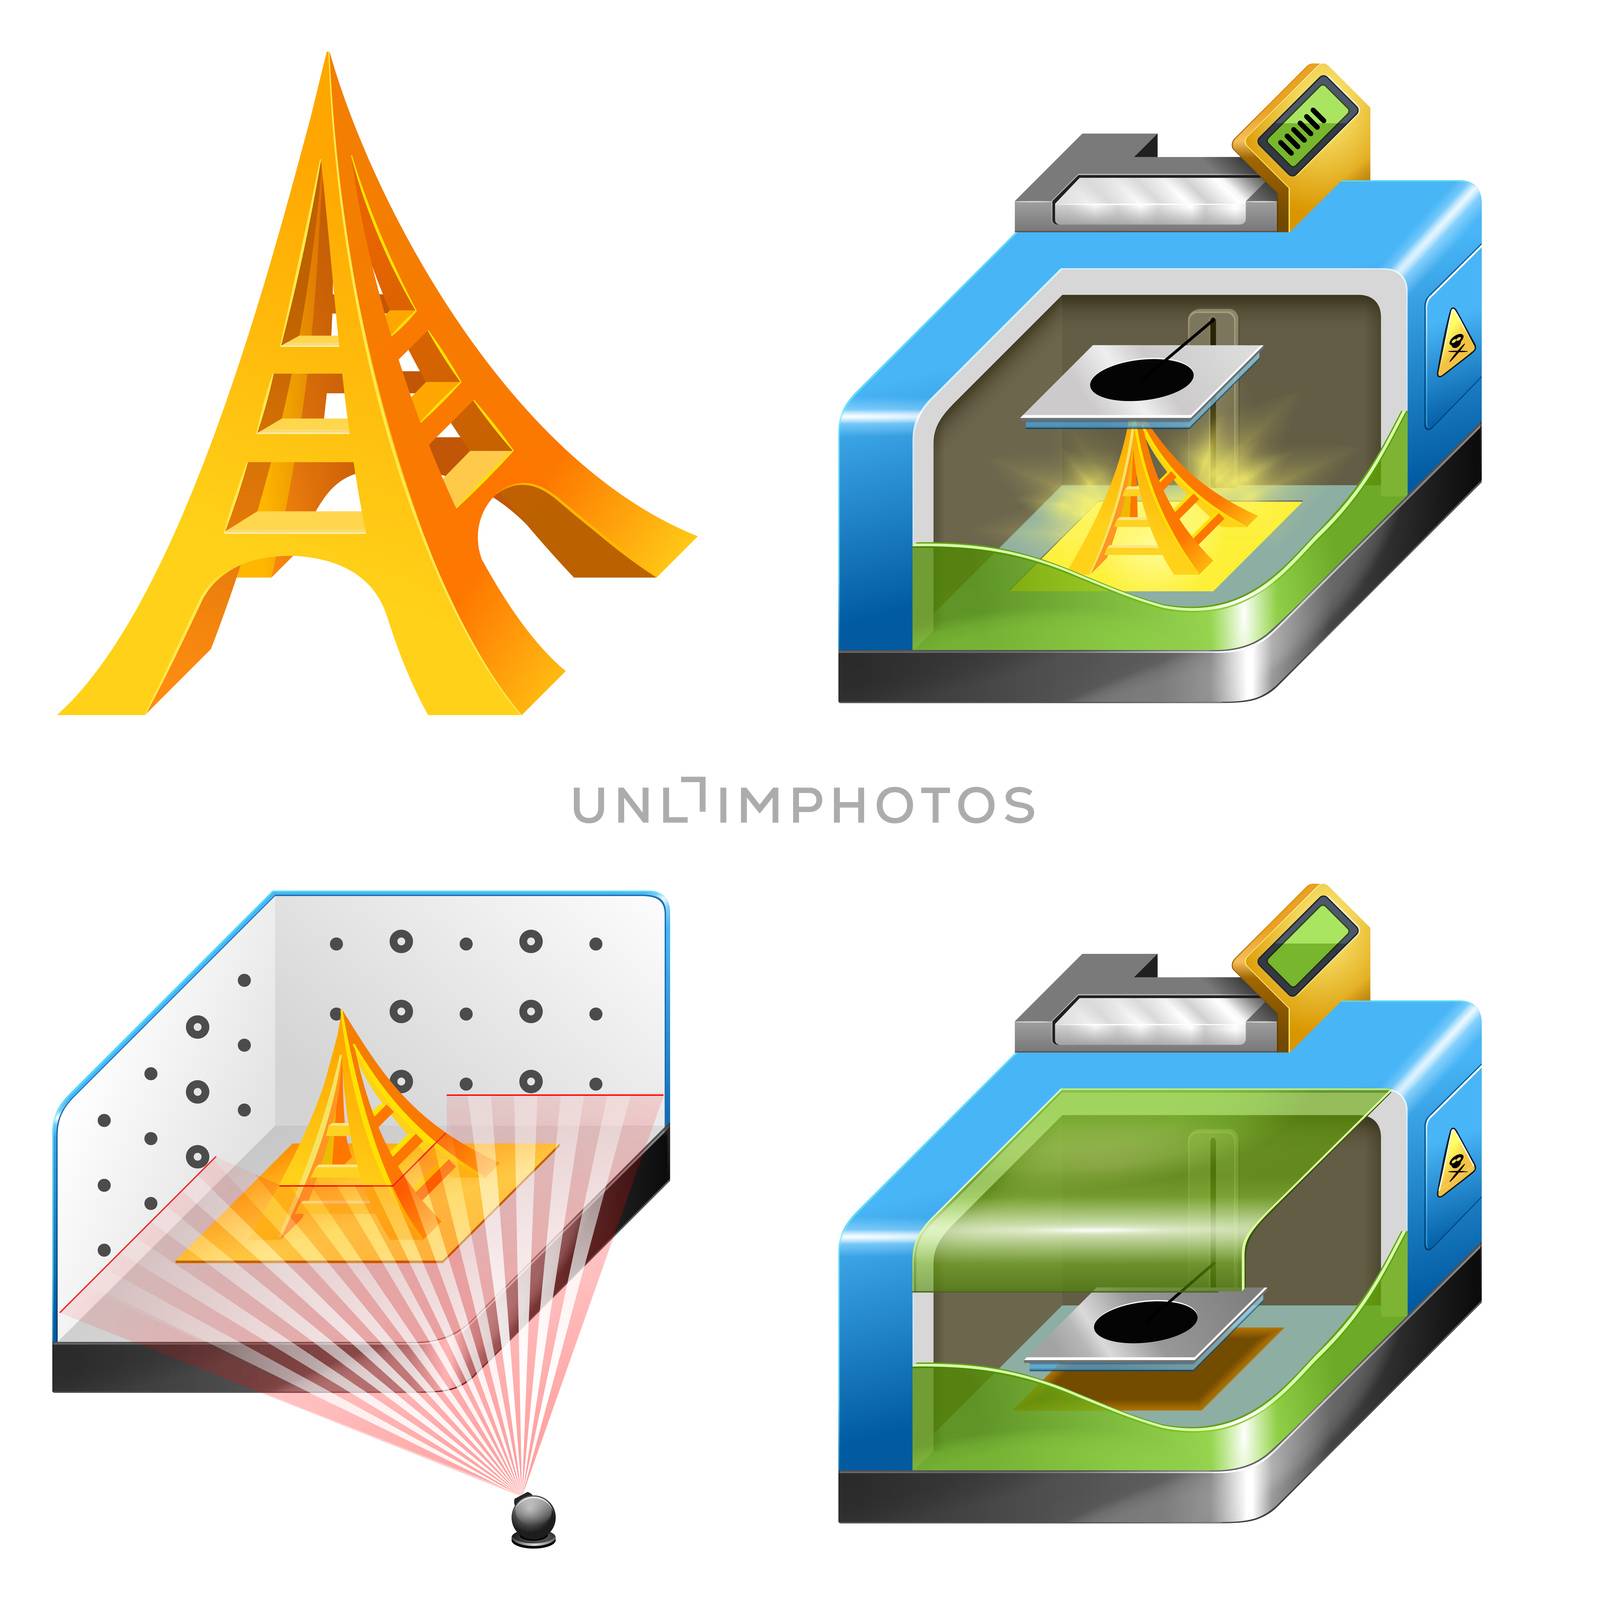 3d printing and 3d scanning icon set. These icons are isolated on a white background. 